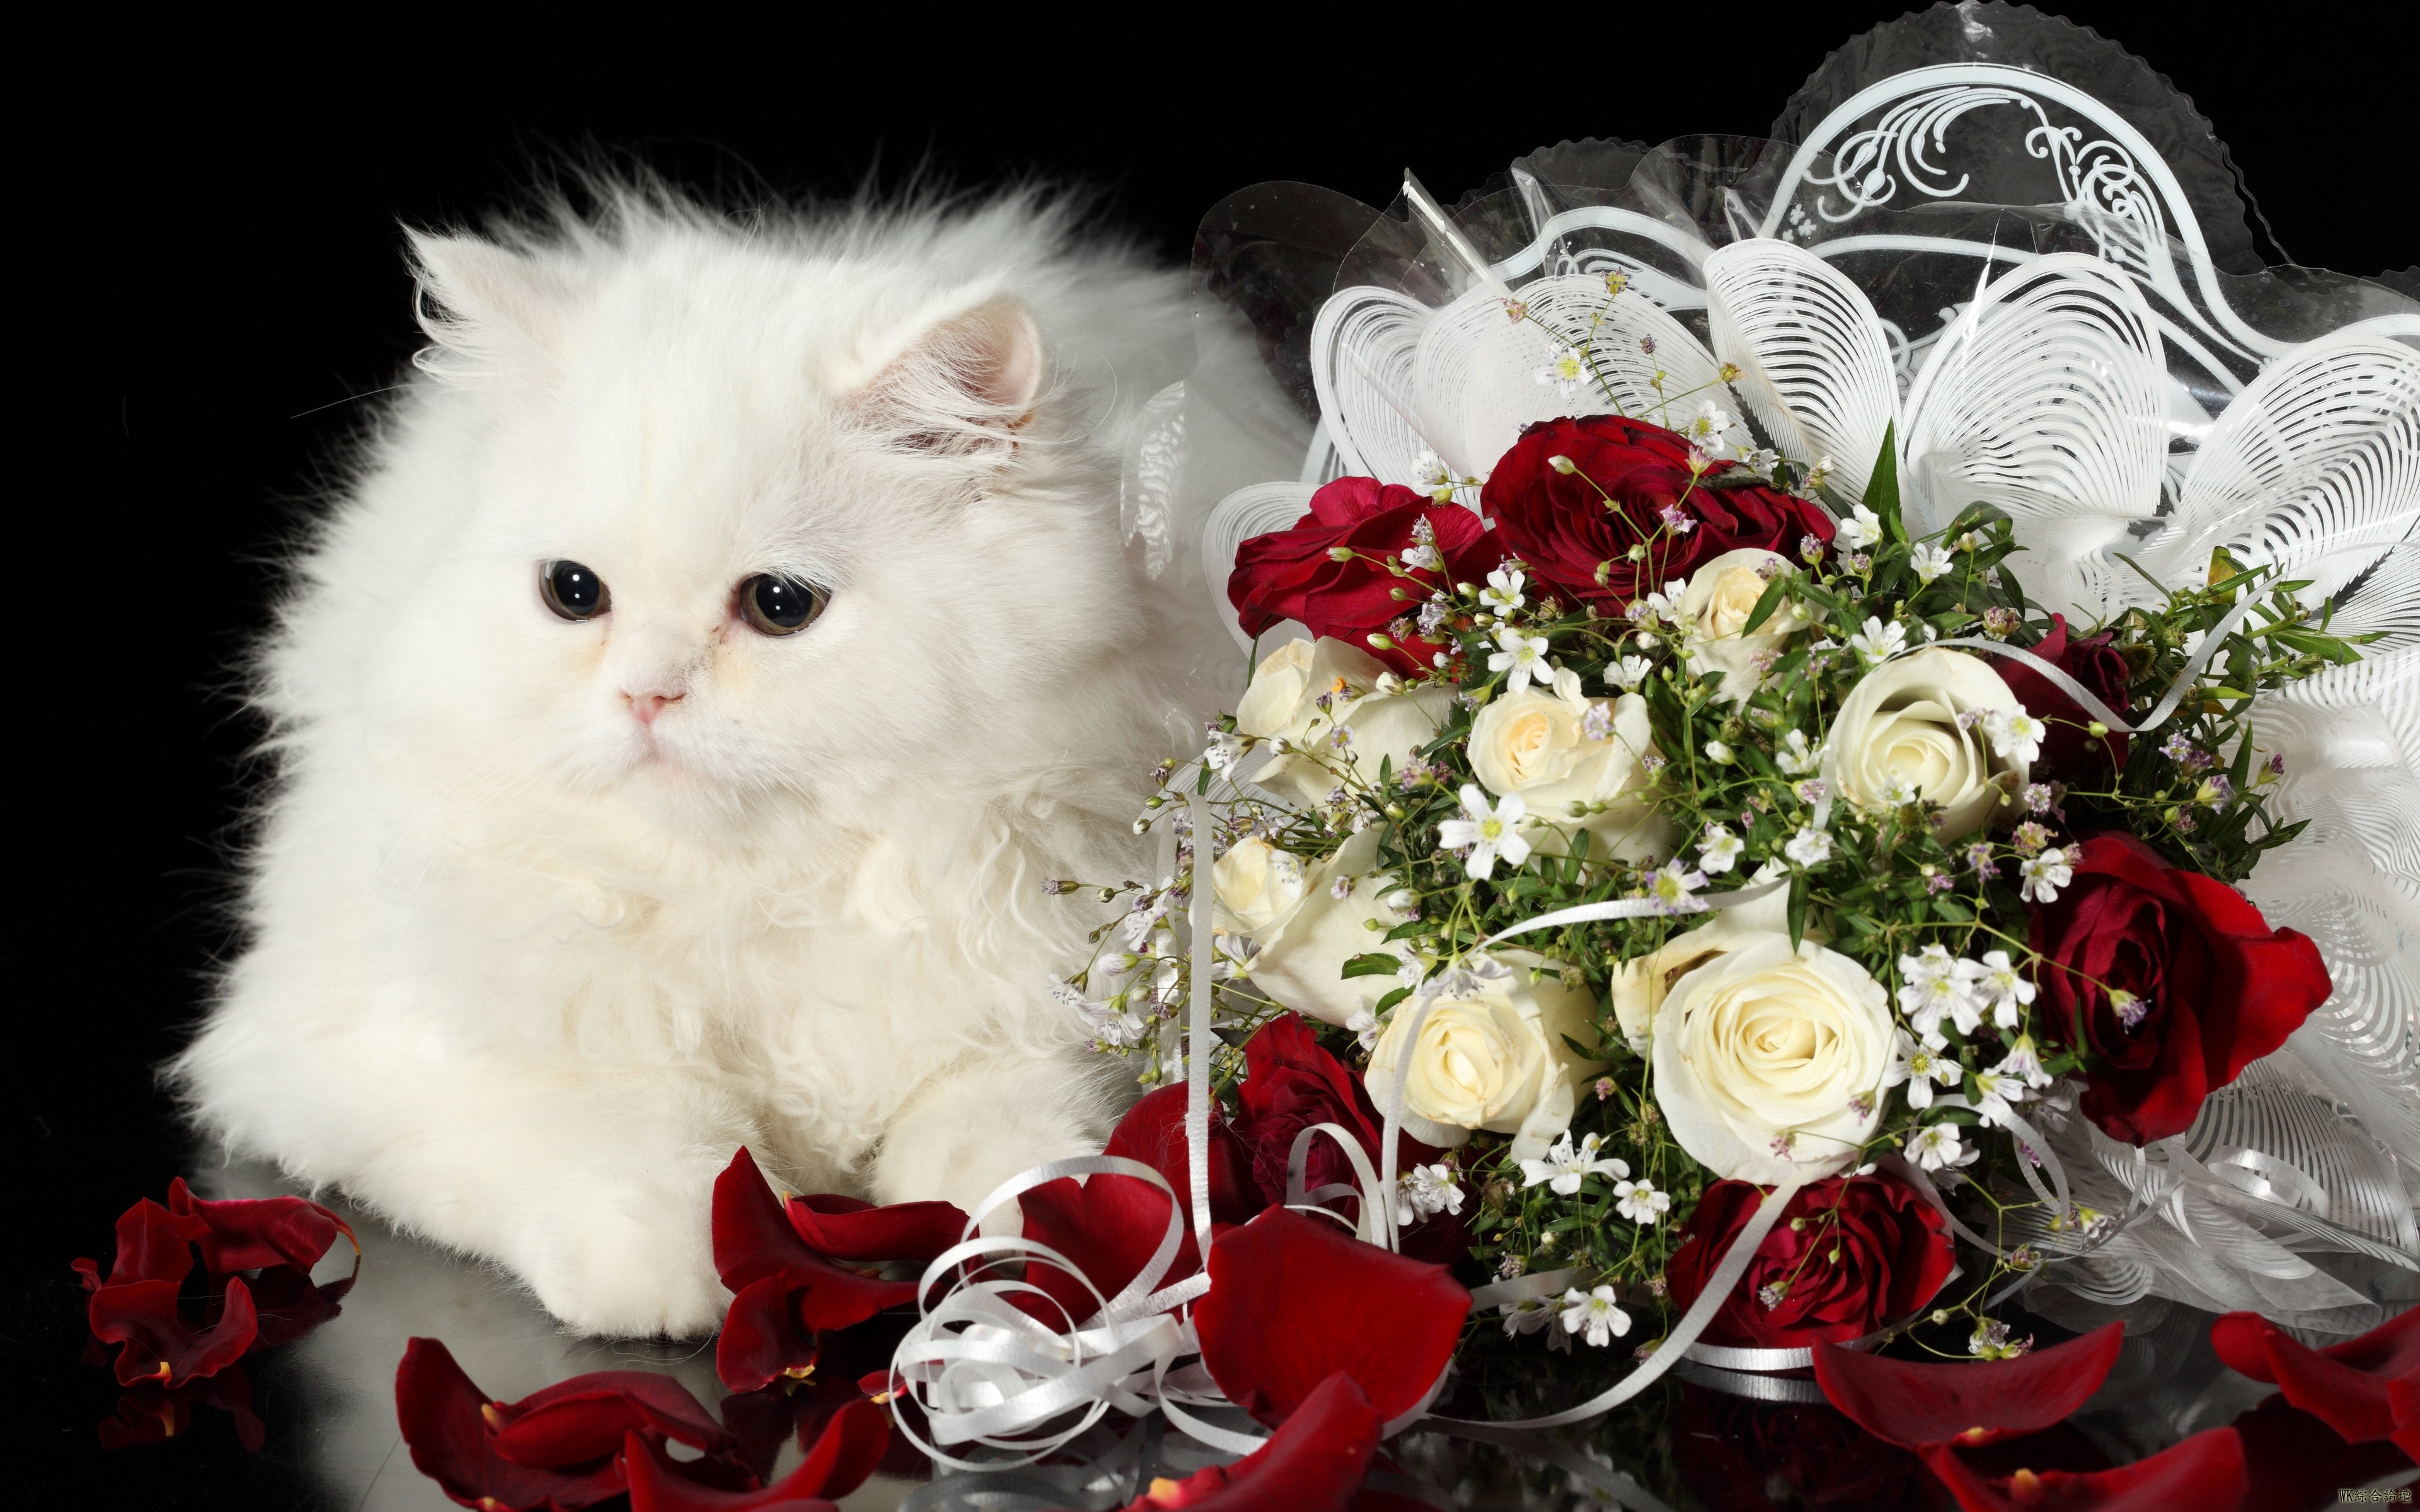 holiday_roses_bouquet_cat_white_fluffy_93305_3840x2400.jpg